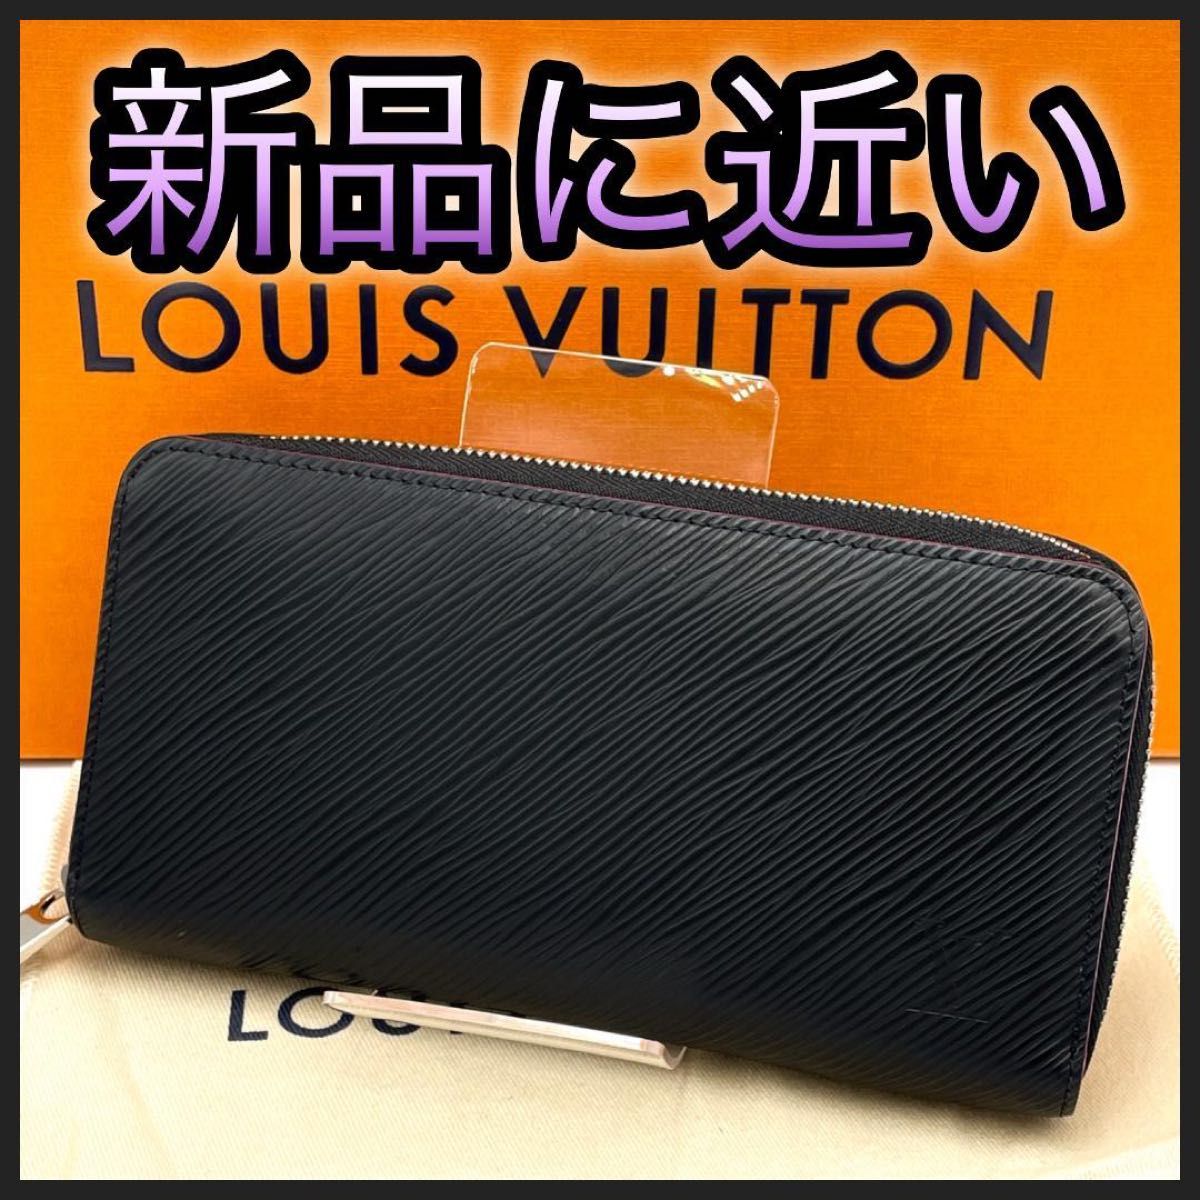 LOUIS VUITTON ルイヴィトン　長財布　エピ　ジッピーウォレット　黒×ピンク